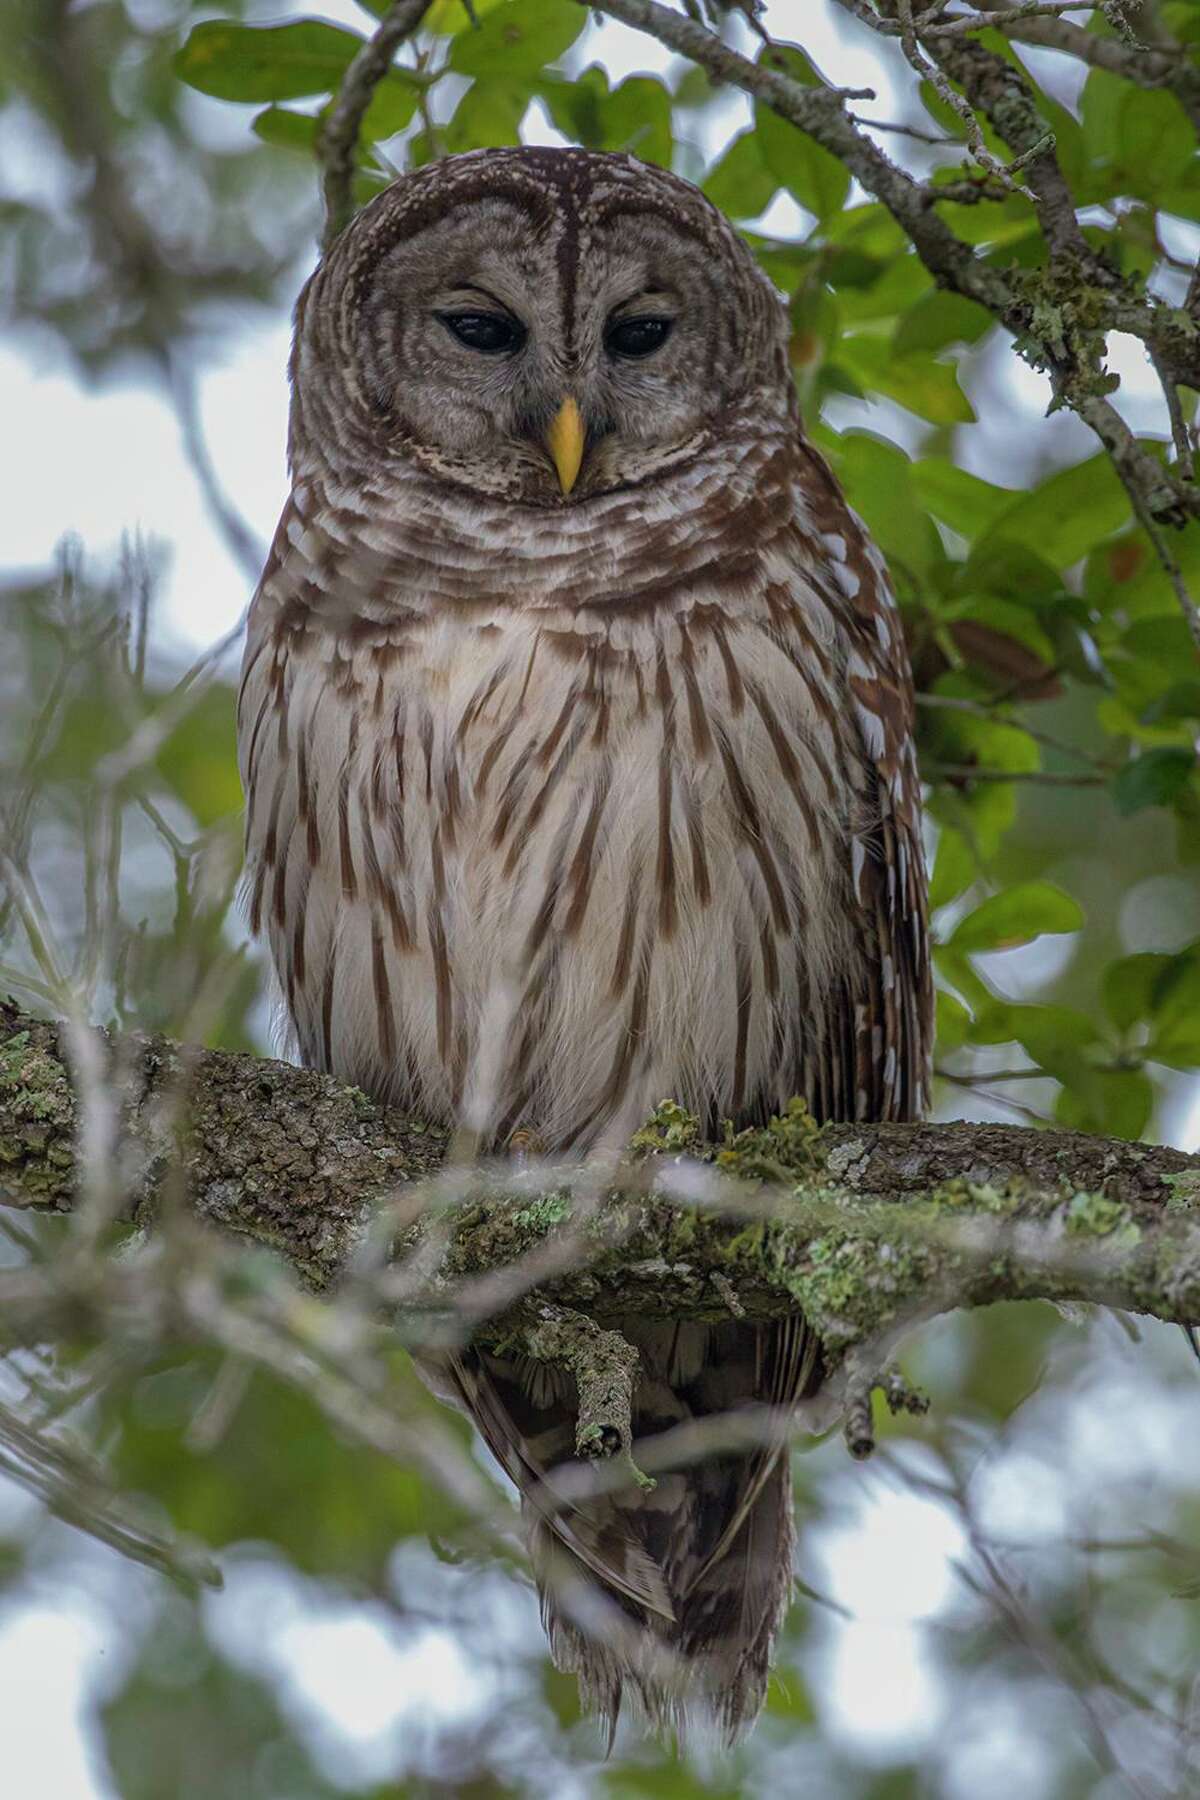 The barred owl will see you this Halloween night but you won’t see it. Photo Credit: Kathy Adams Clark Restricted use.